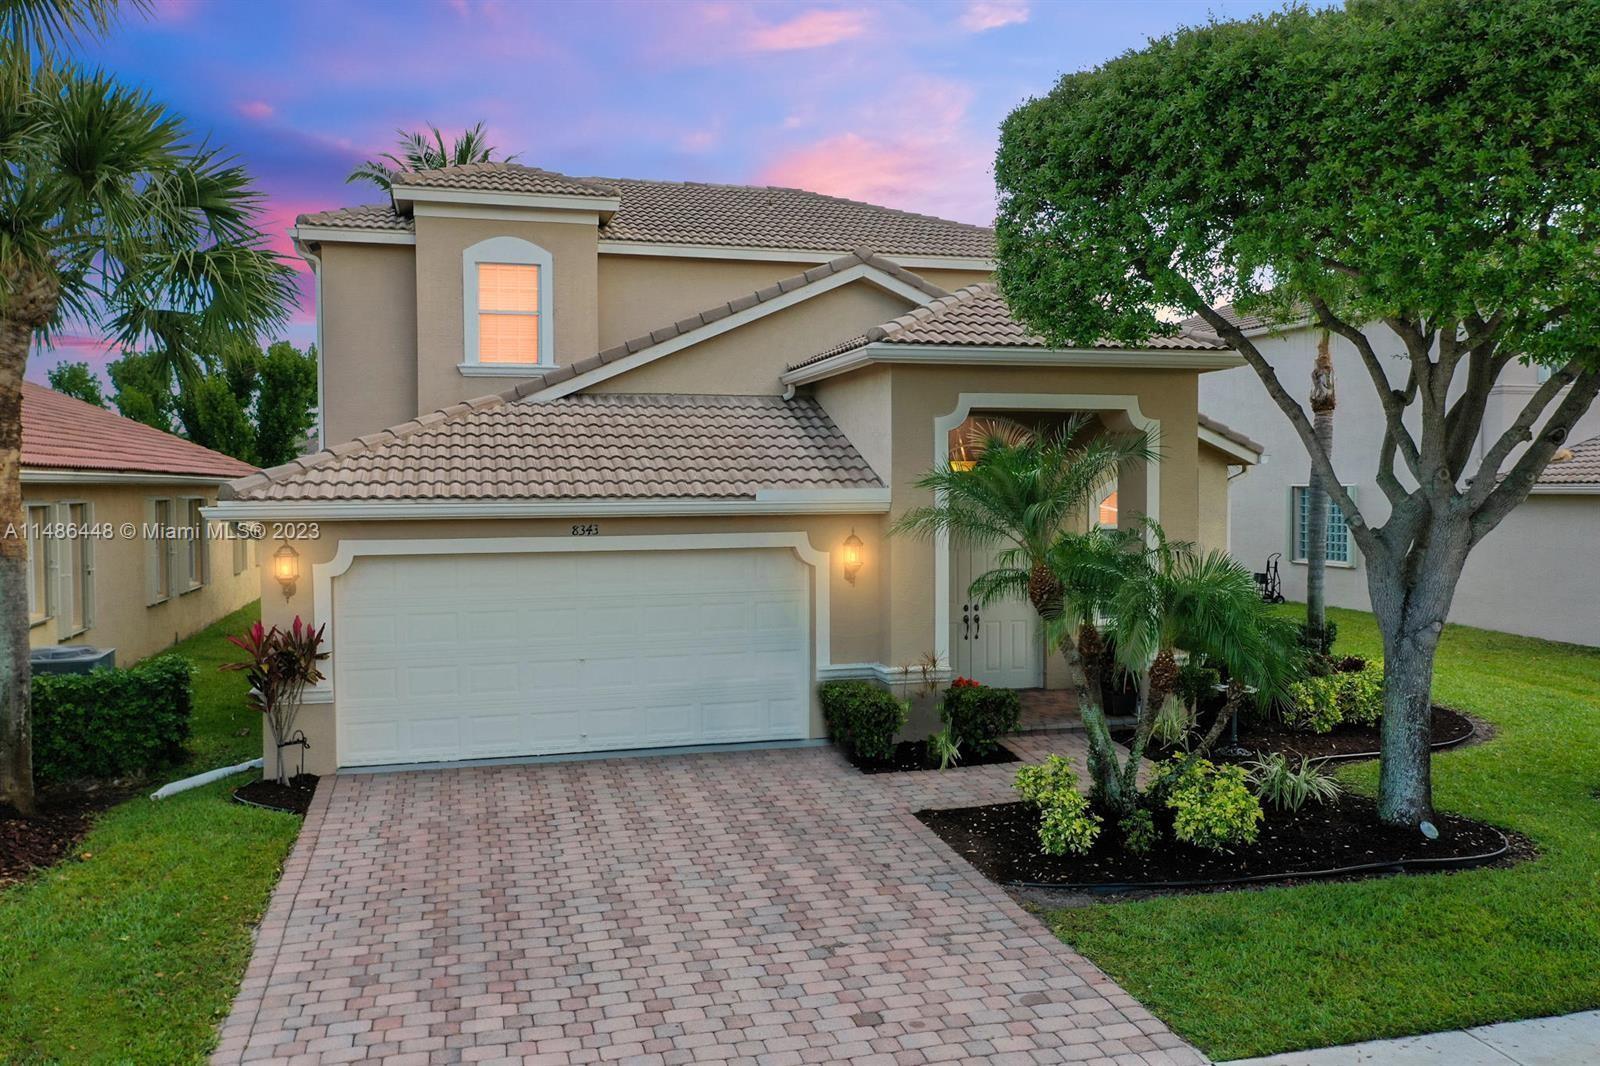 Rare opportunity! 5 bed 3 bath lakefront home located in the sought-after Isola Bella gated communit